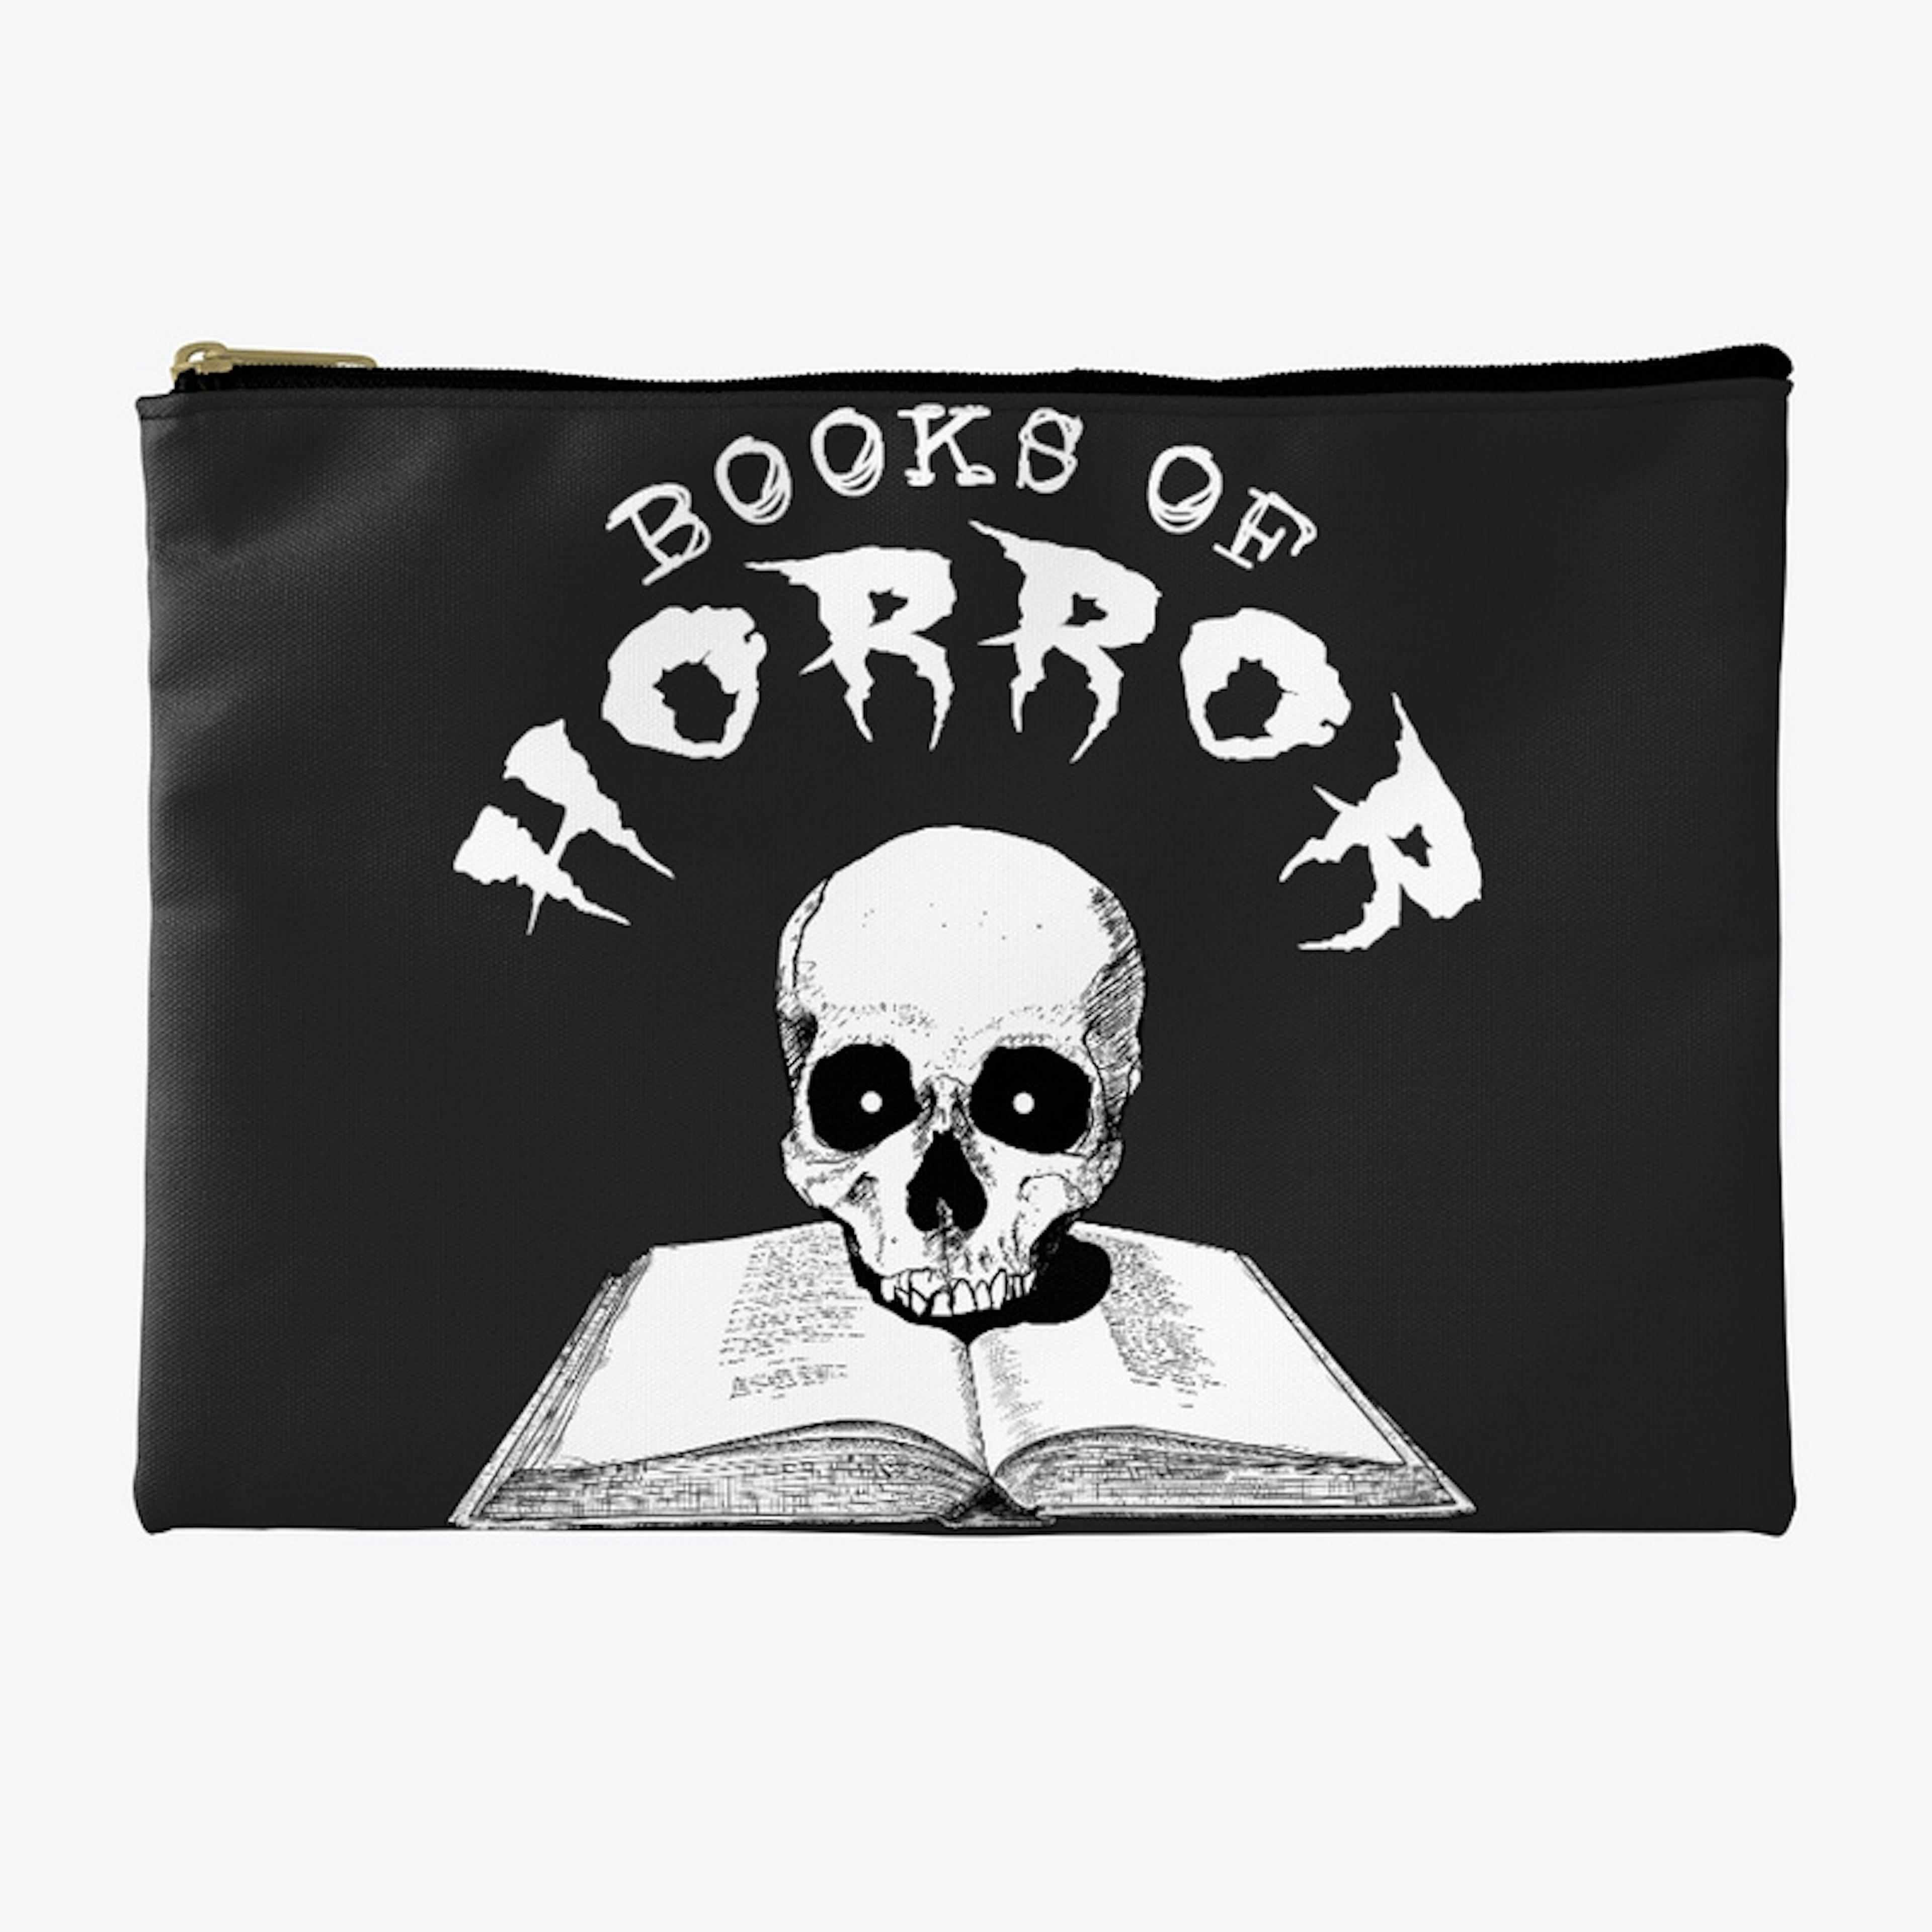 Books of Horror Tote dual sided